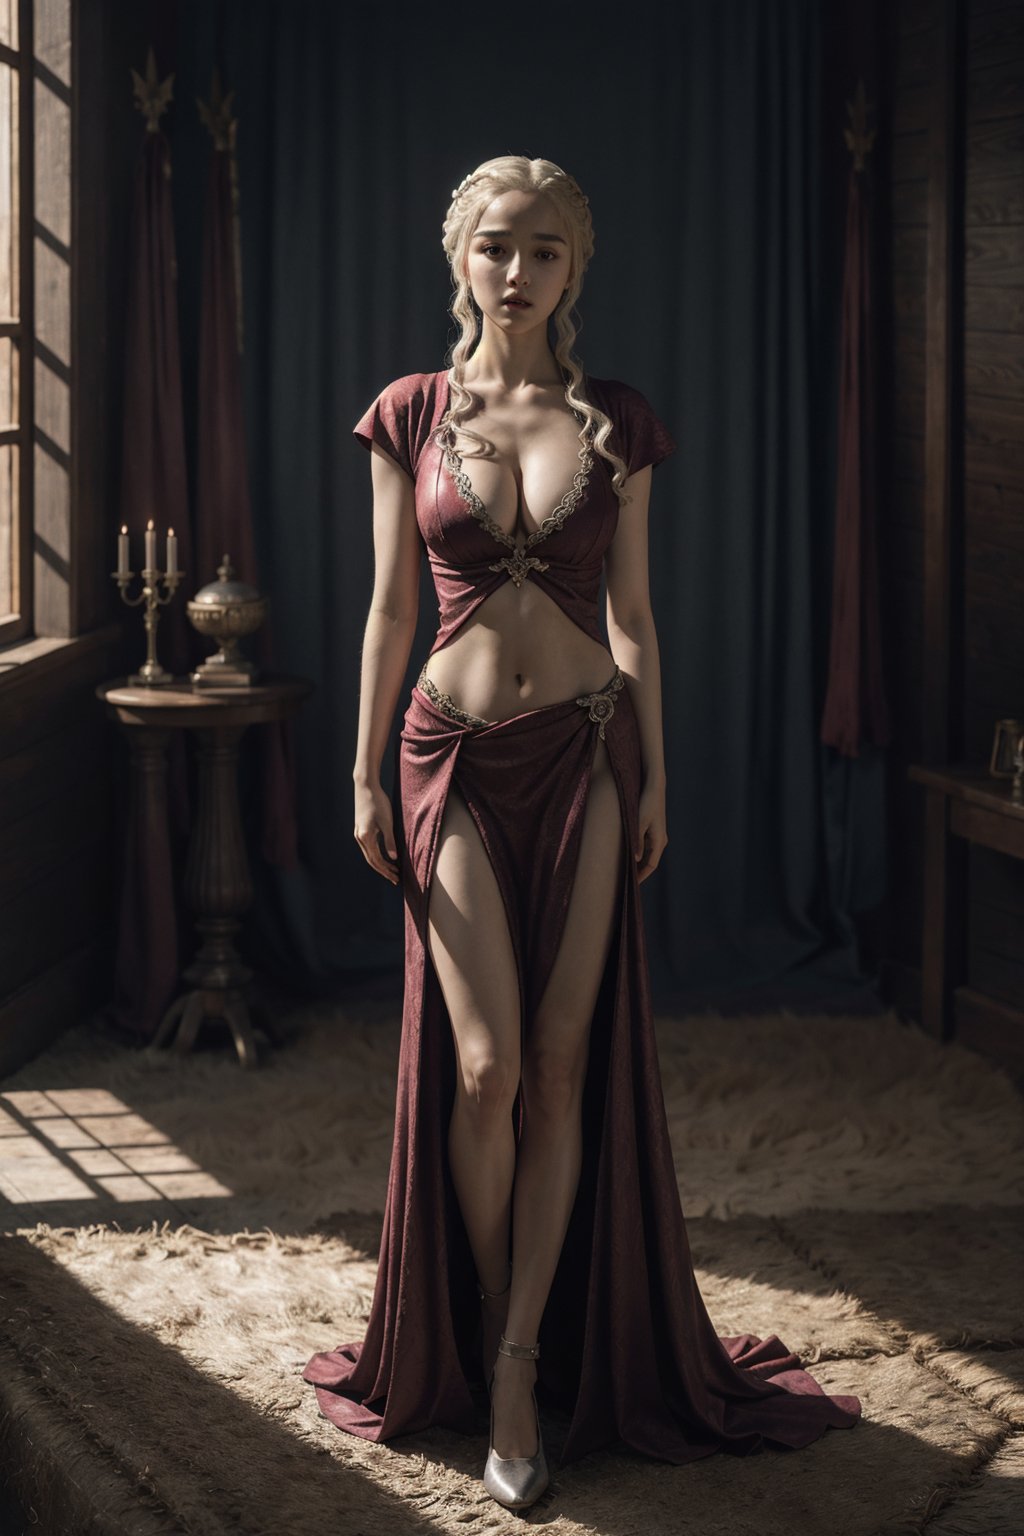 Full body, a model,  detailed face,  deep cleavage,  navel,  clear face,  Portrait, cinematic shot of game of thrones,  game of thrones dress, dragons in the background 